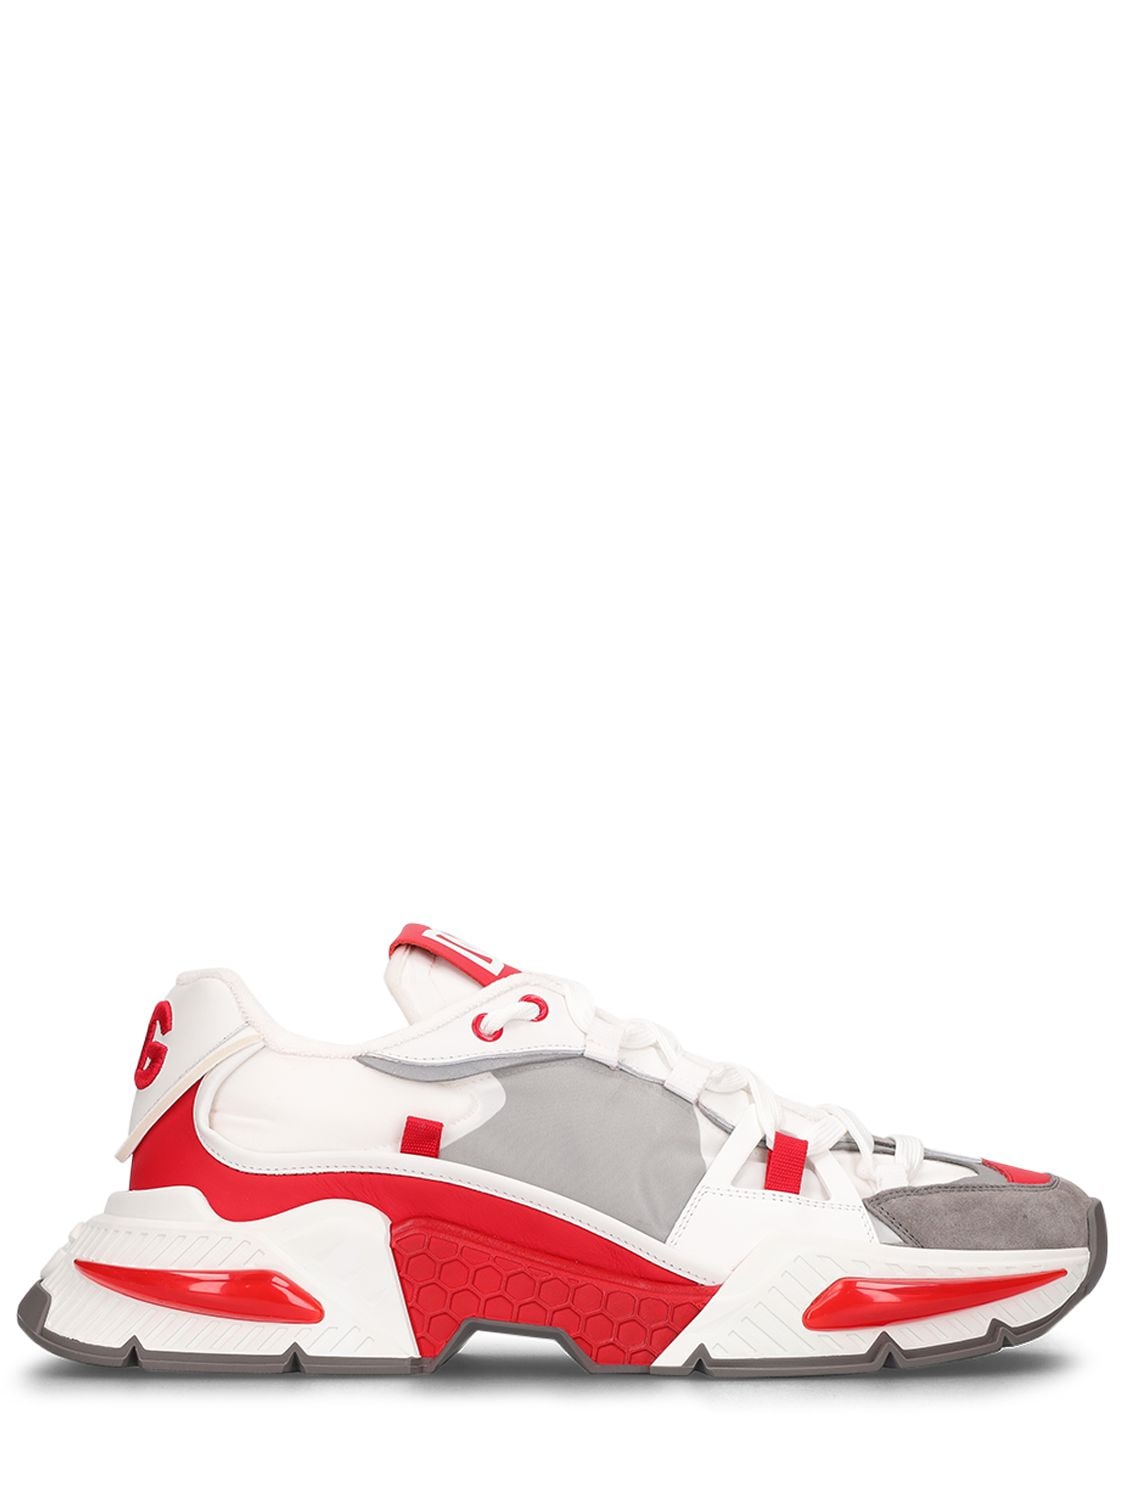 Dolce & Gabbana Air Master Tech Low Top Sneakers In White,red